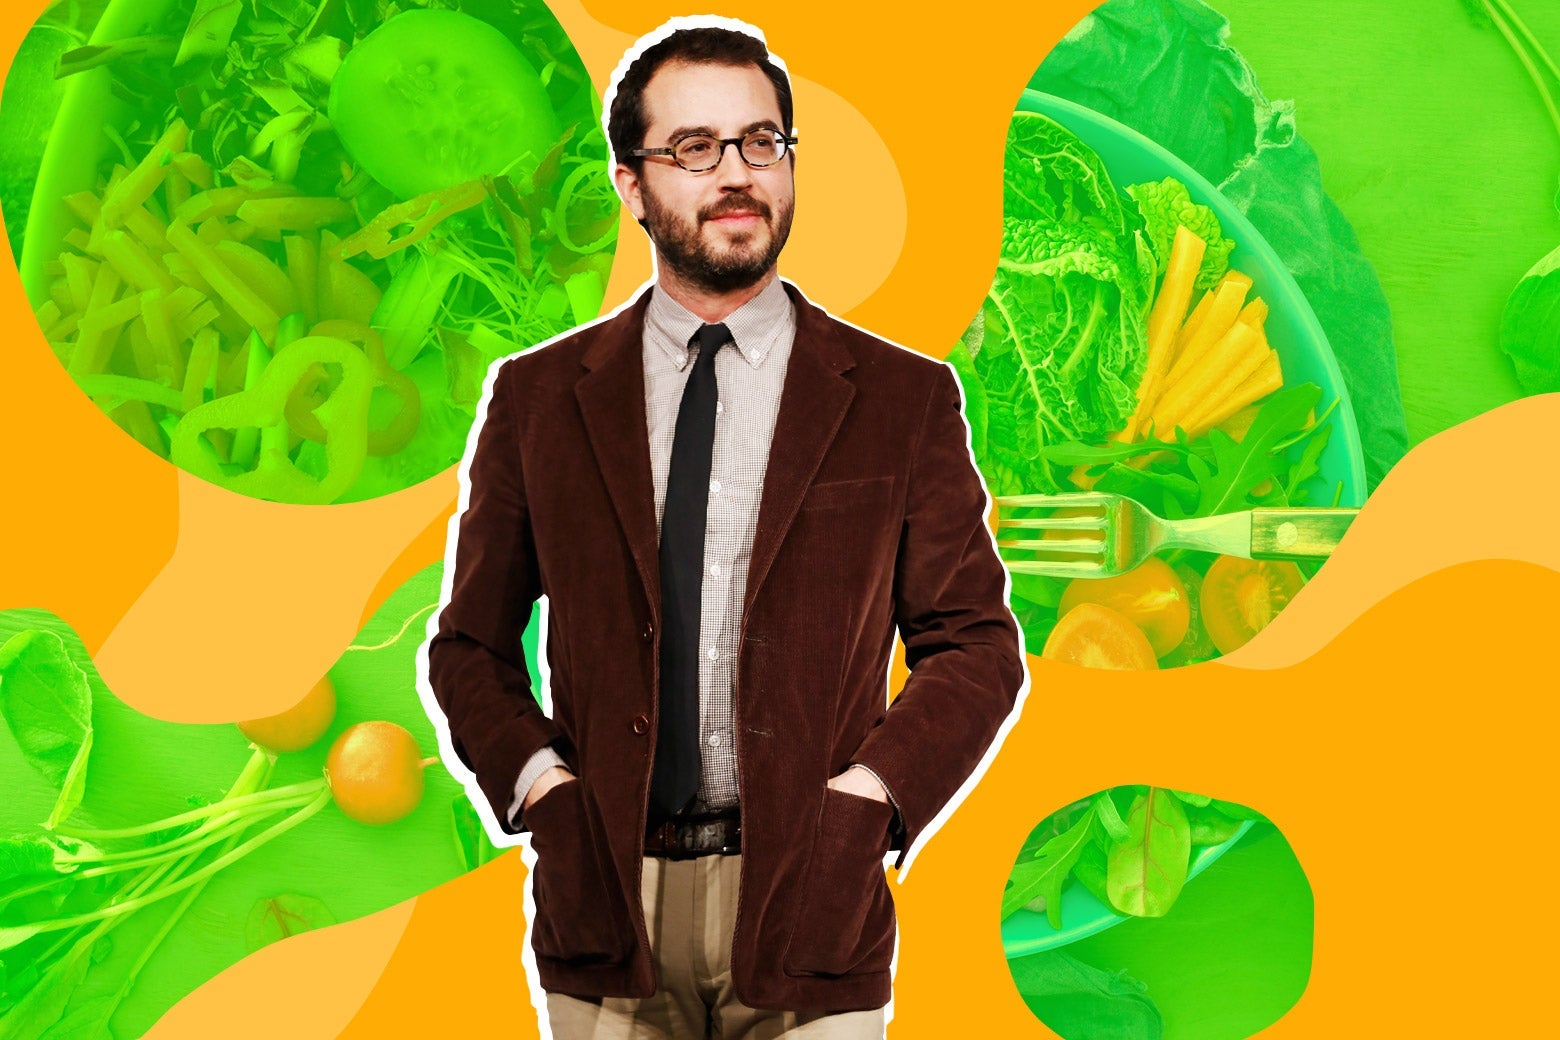 Photo illustration of Jonathan Safran Foer with a background of vegan food